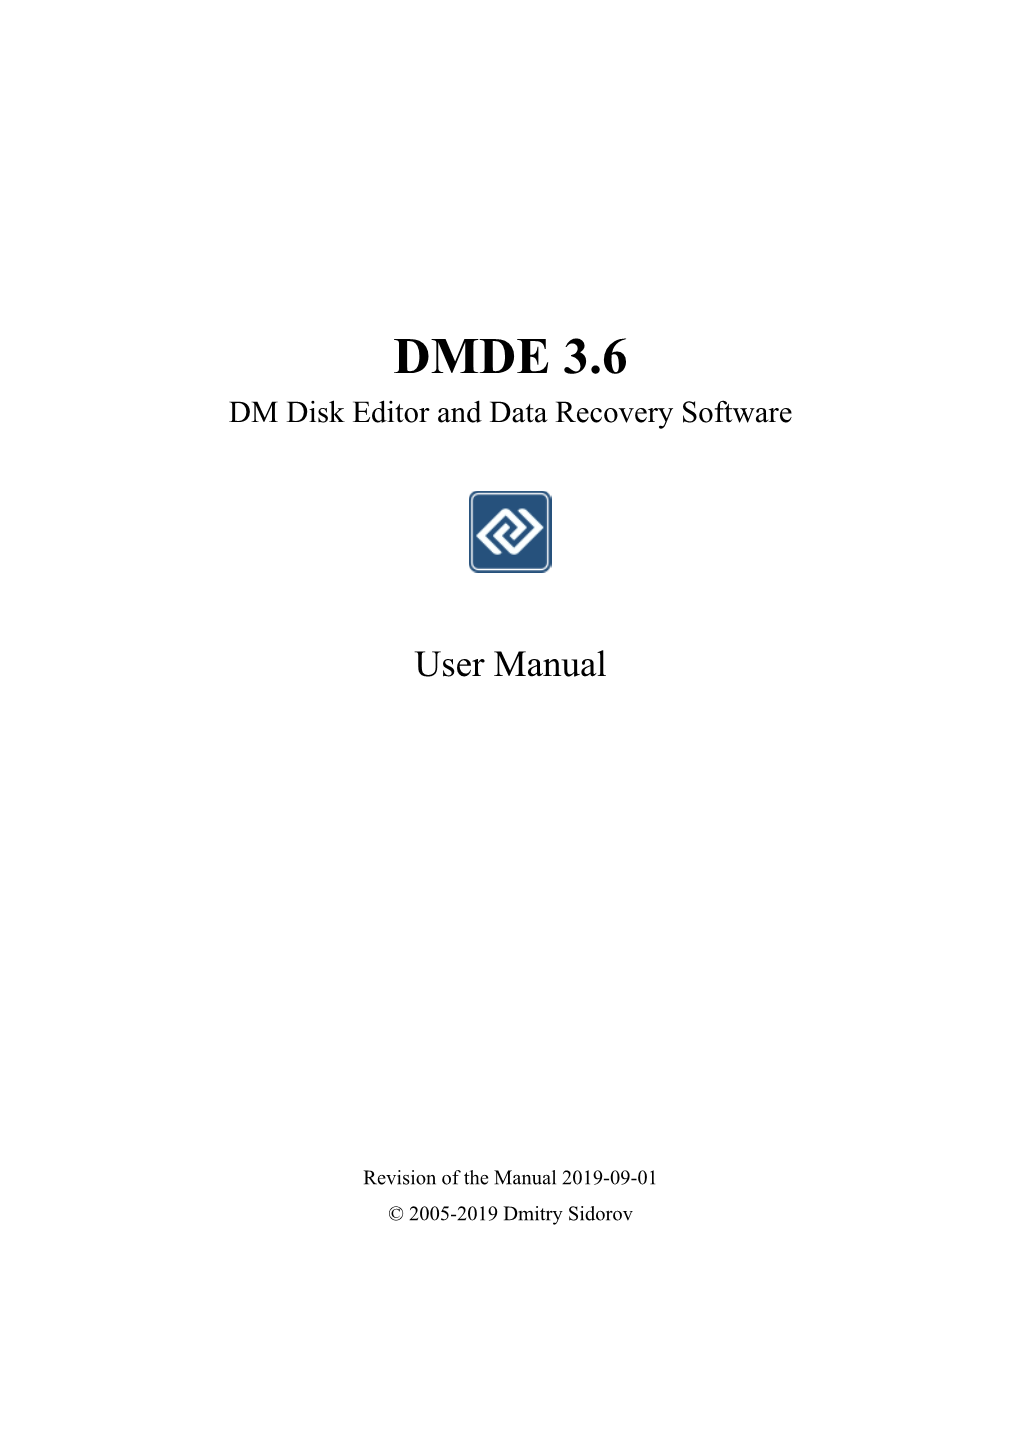 DMDE 3.6 DM Disk Editor and Data Recovery Software